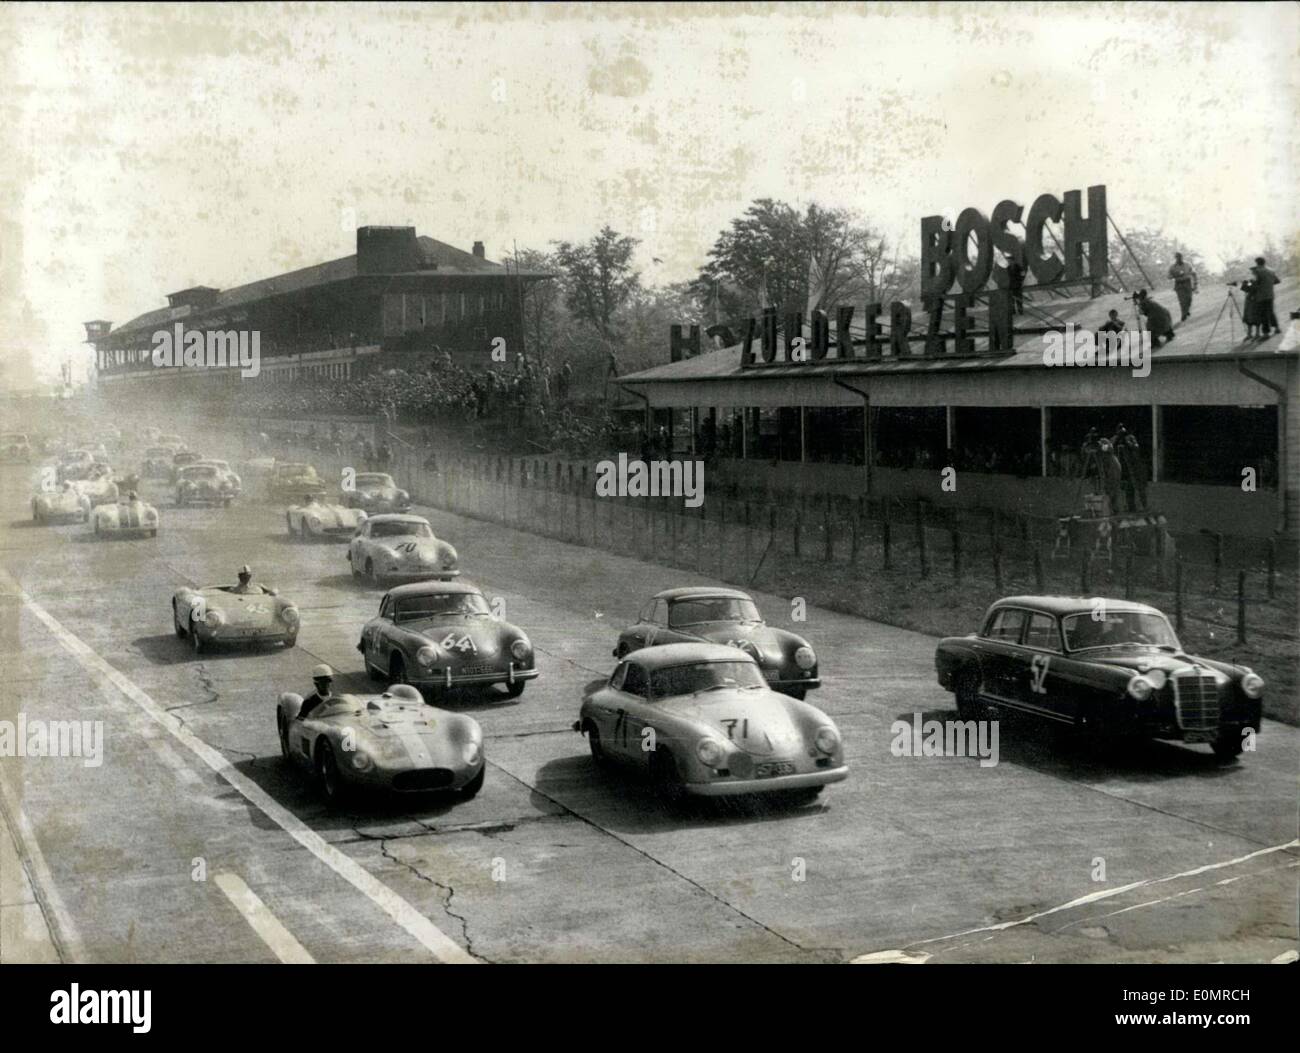 May 27, 1956 - This is a picture for sports car enthusiasts! Pictured here are 57 sports and racing cars as they begin the 1,000km race at Nuerburgring in Germany. Stock Photo